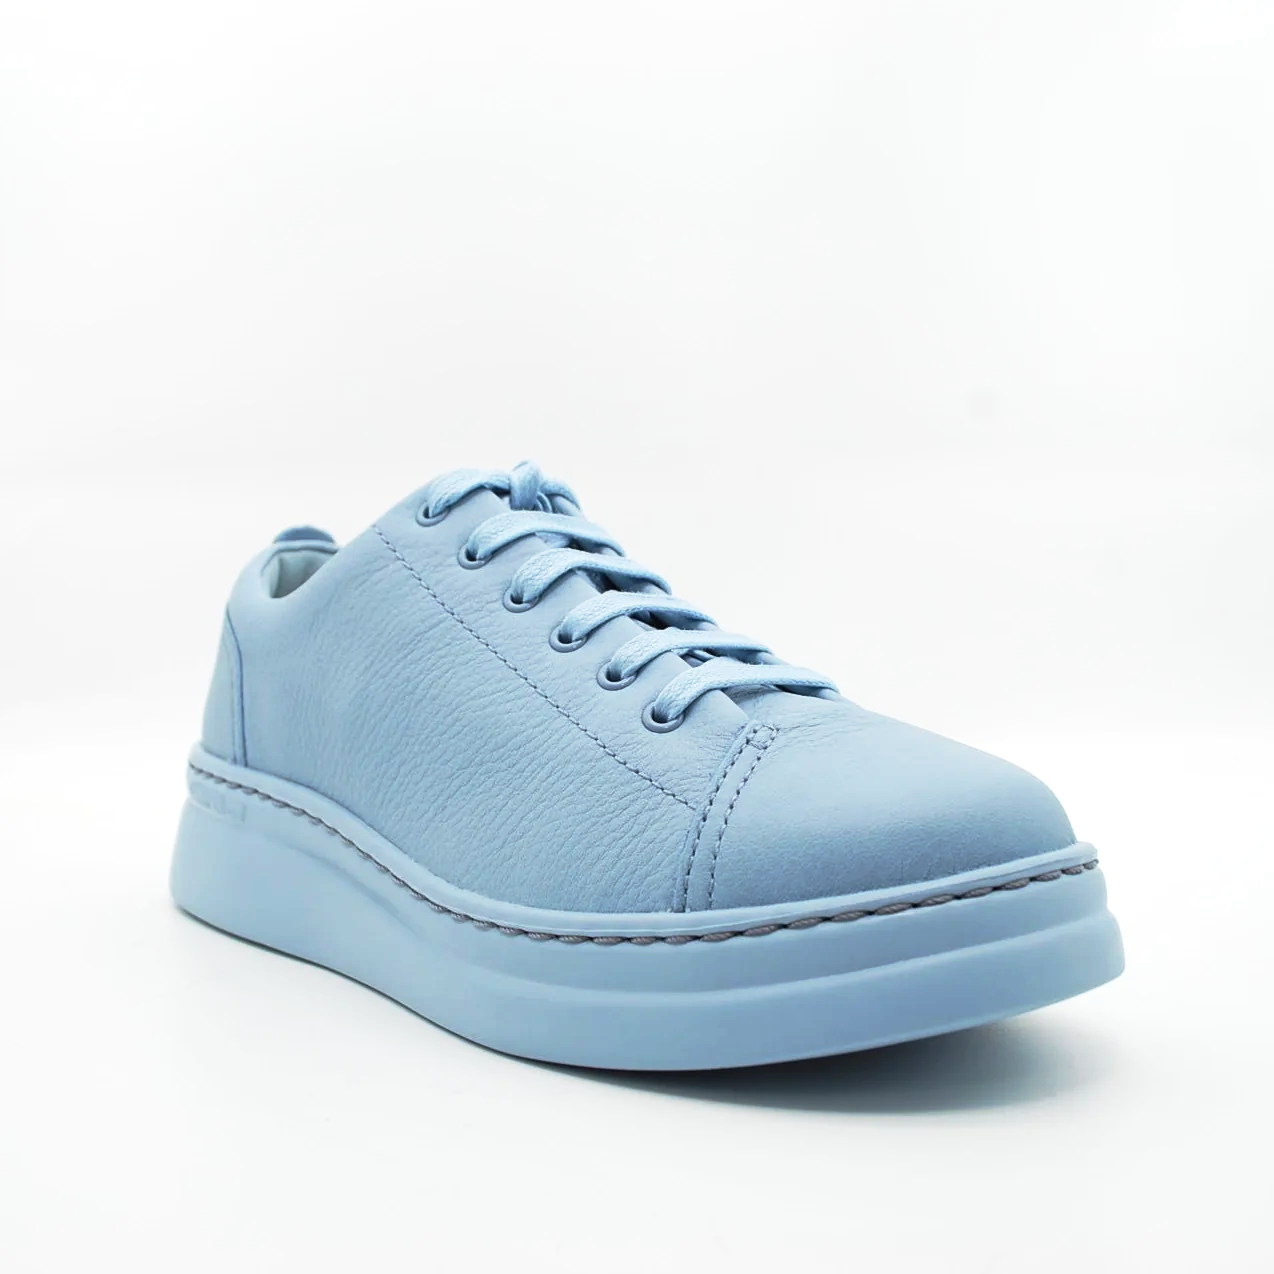 sneakers-camper-runner-up-urban-shoes-2_7adfd546-7c84-4e30-8b00-906504fe13fc.png